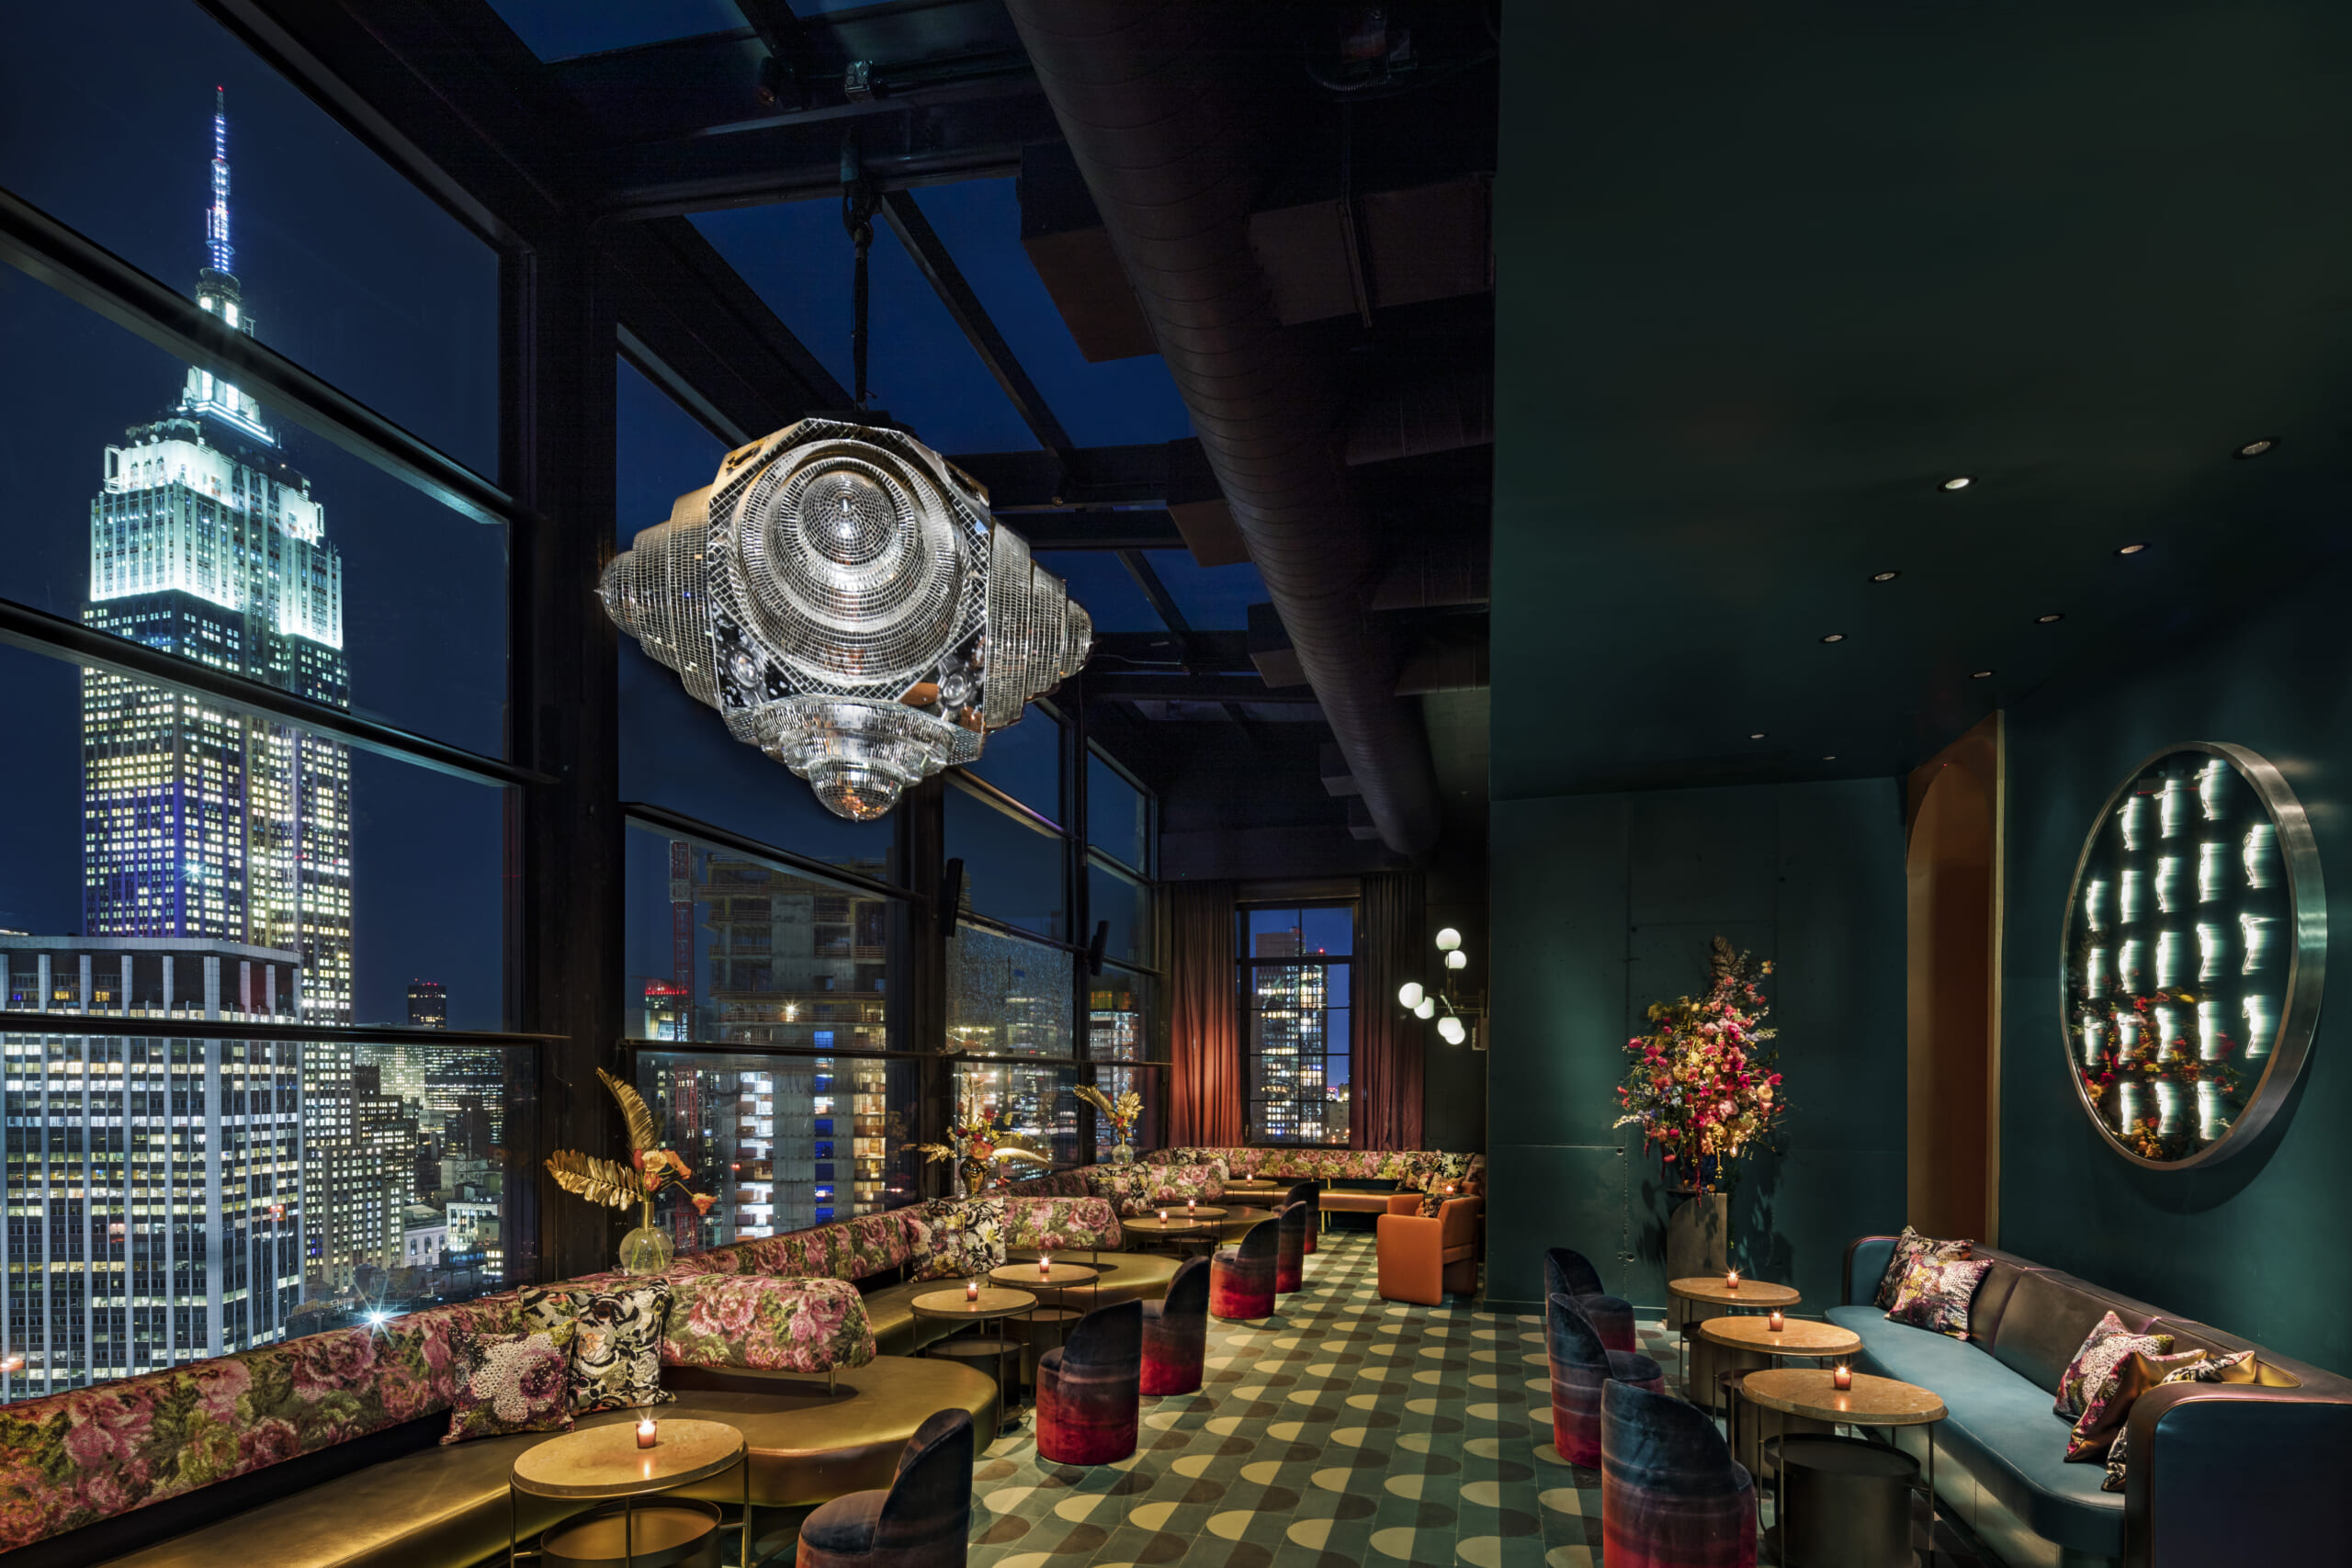 Inside The Fleur Room, The Newest and Highest Rooftop Bar in NYC - Maxim